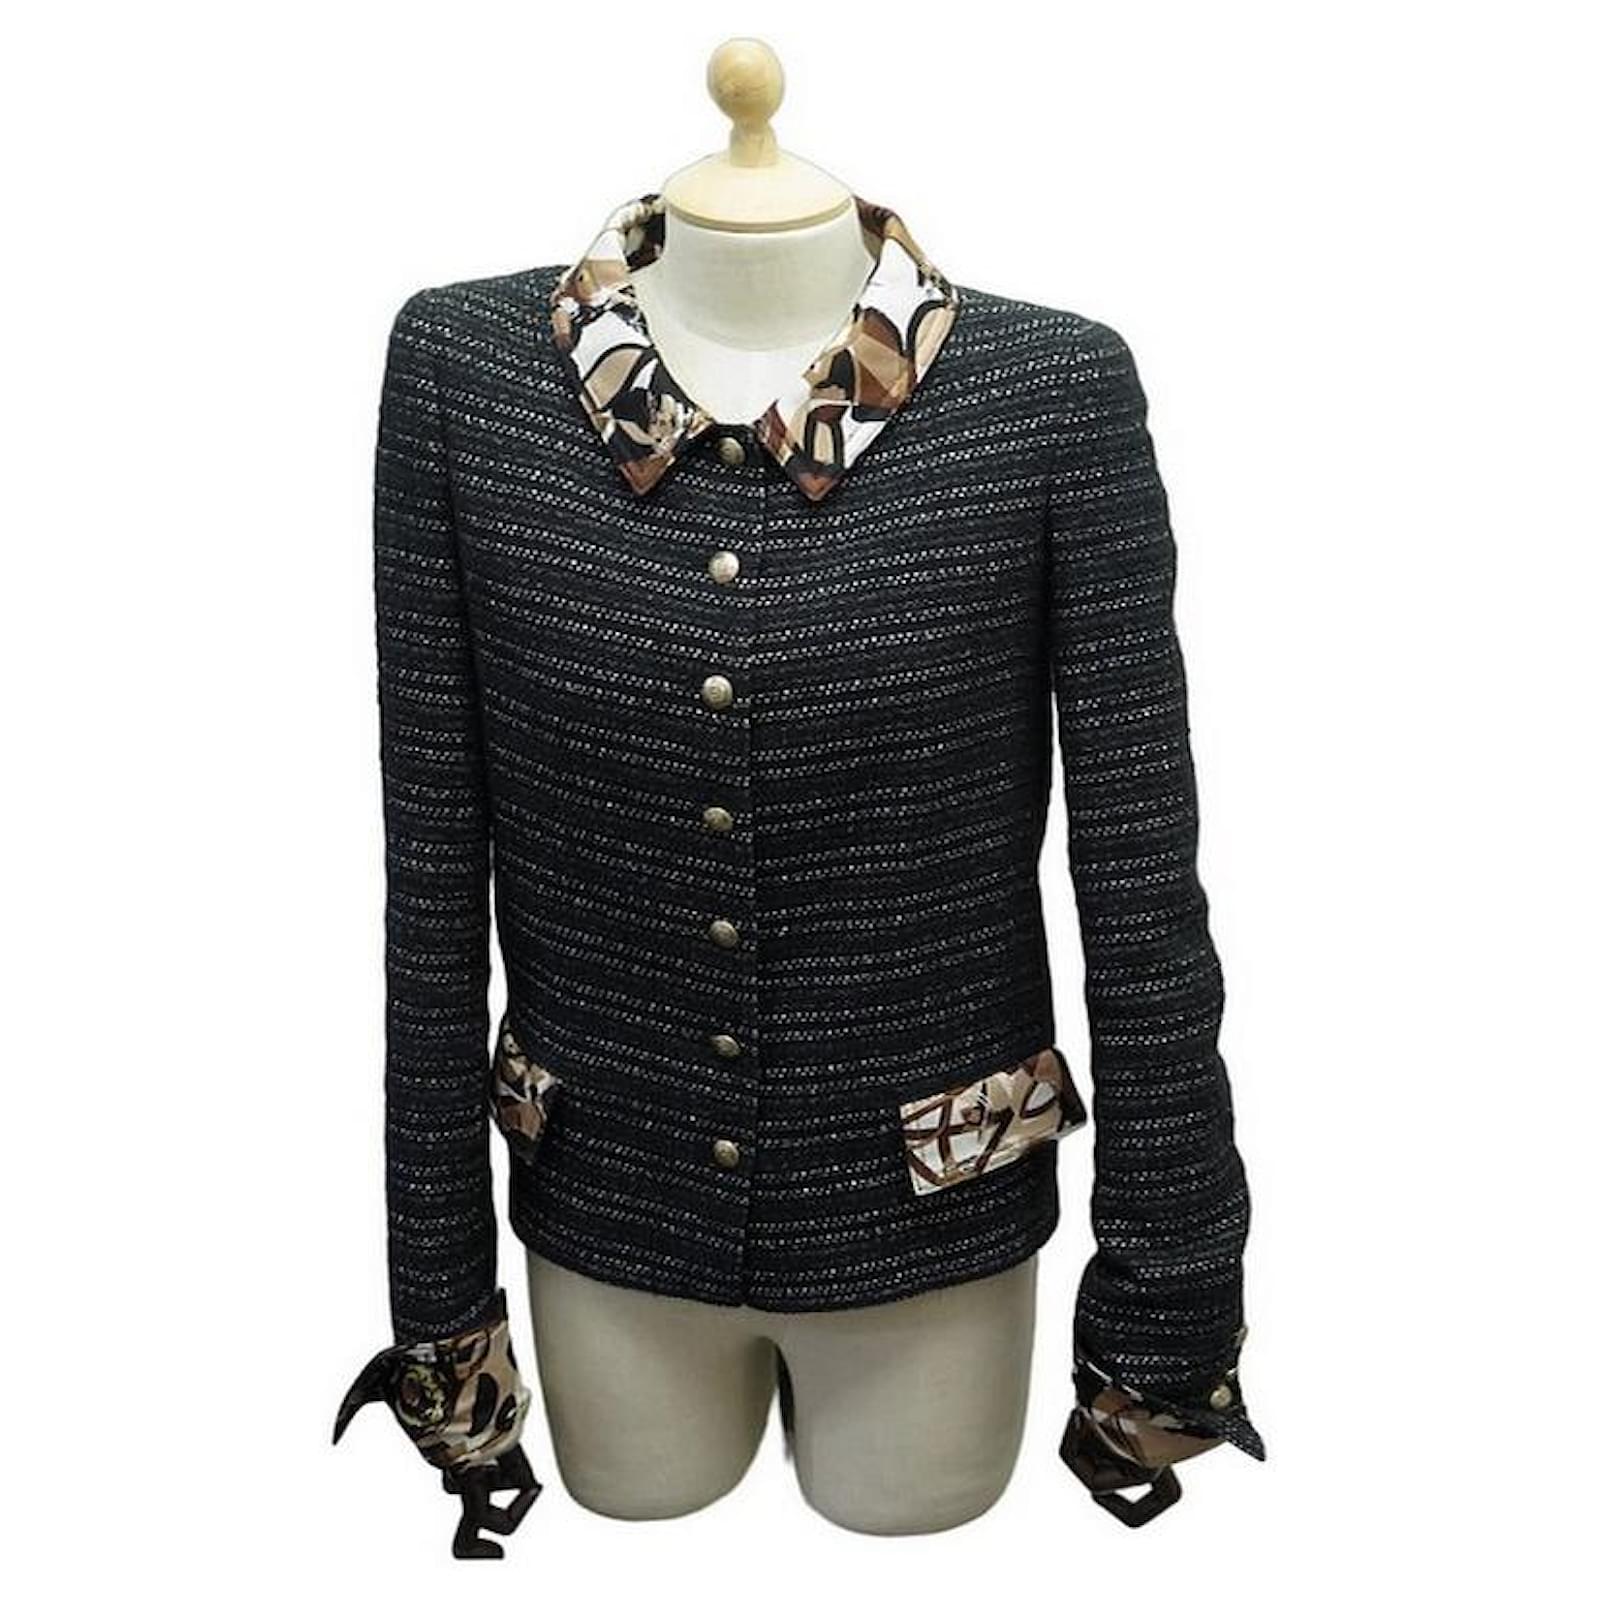 Jackets Chanel Chanel P JACKET25560W03501 CC M Logo Buttons 38 in Tweed Design Coco Jacket